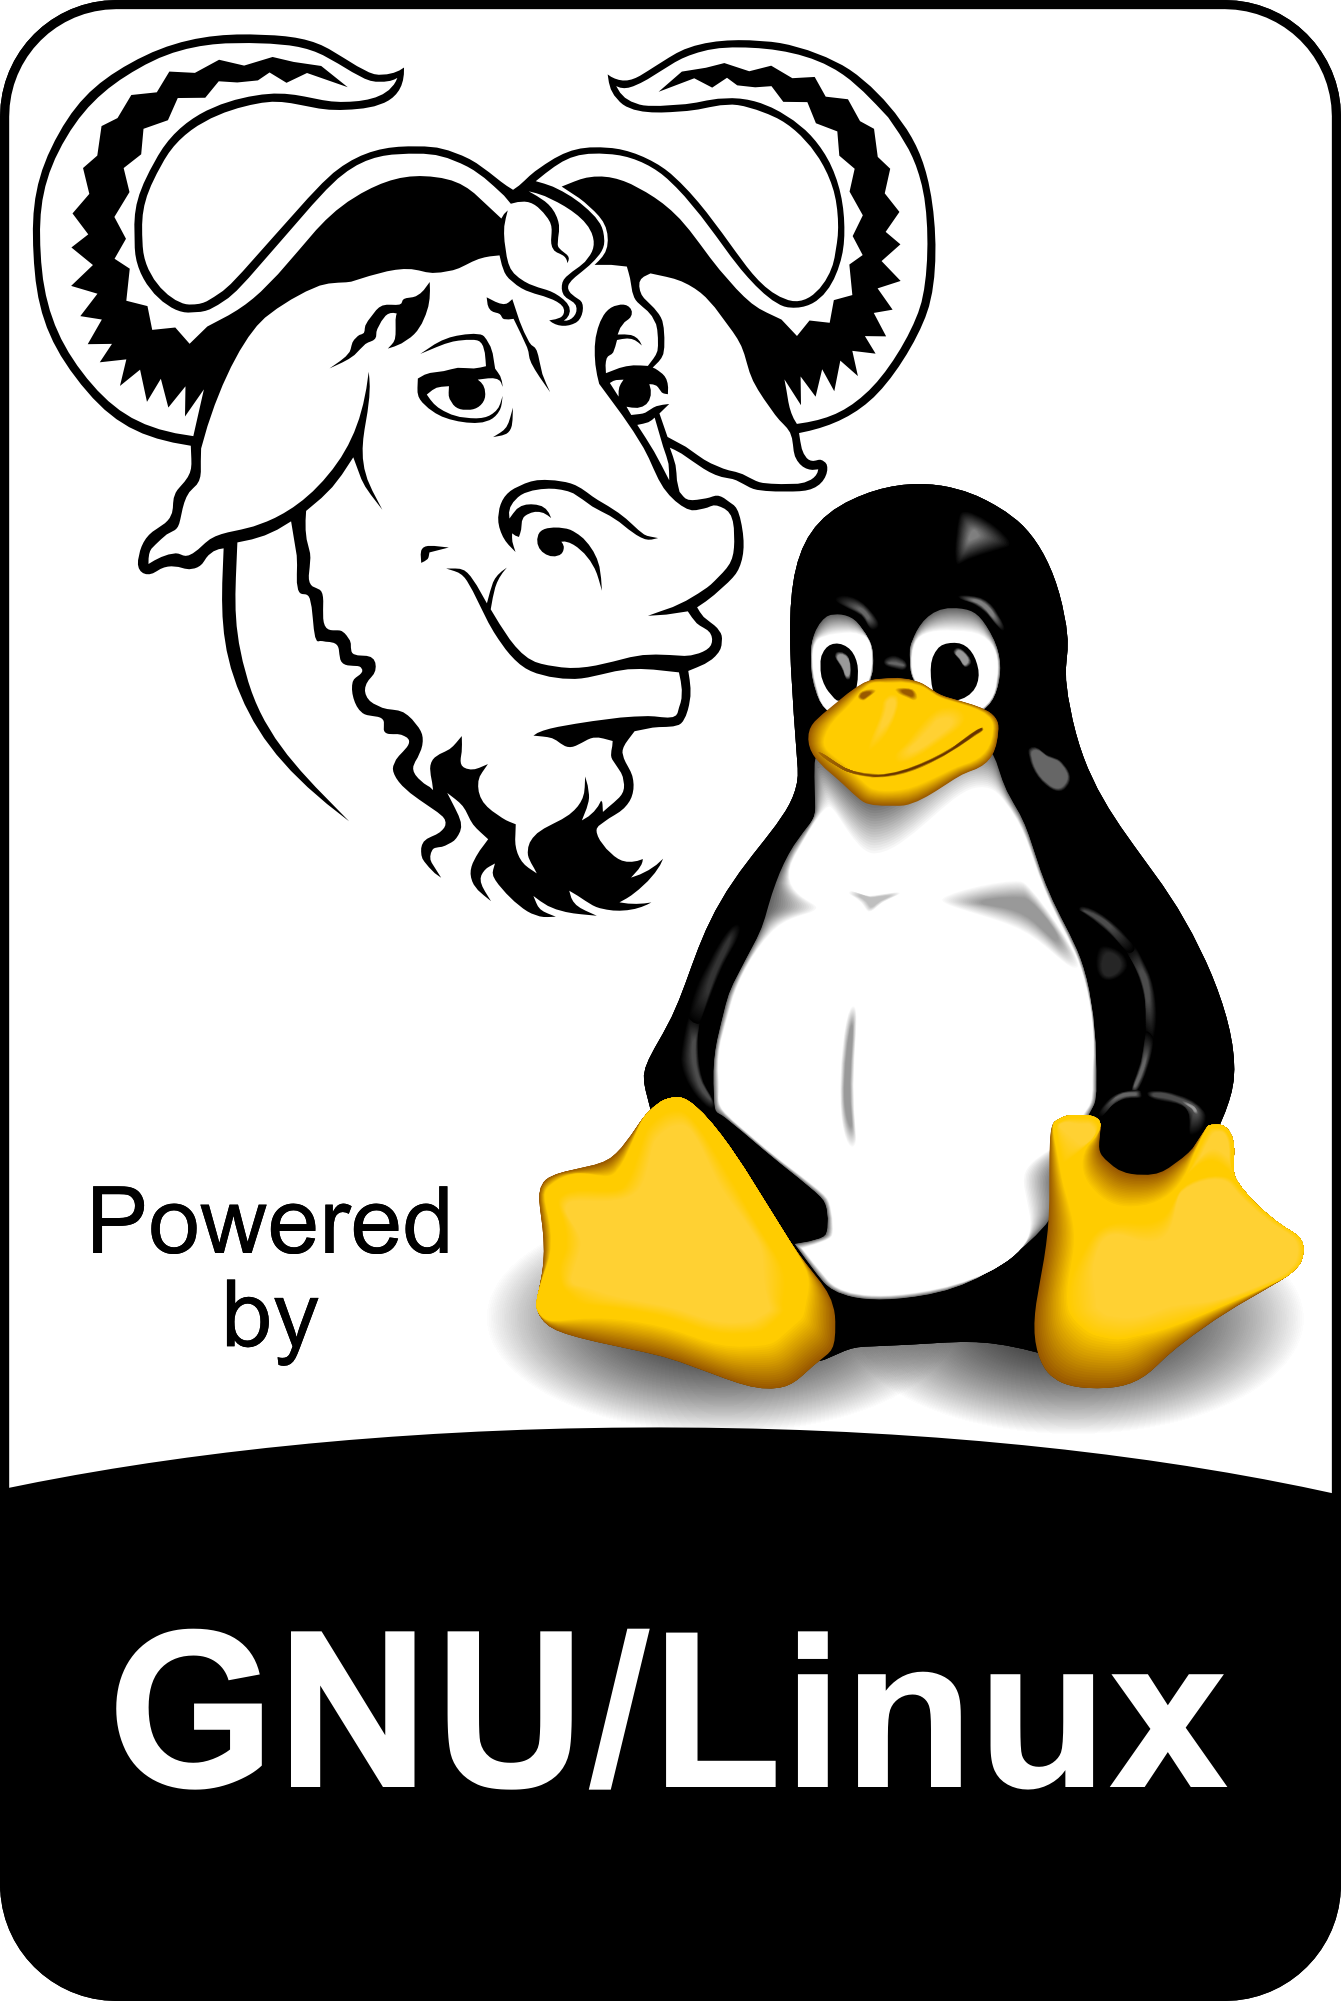 Powered by GNU Linux